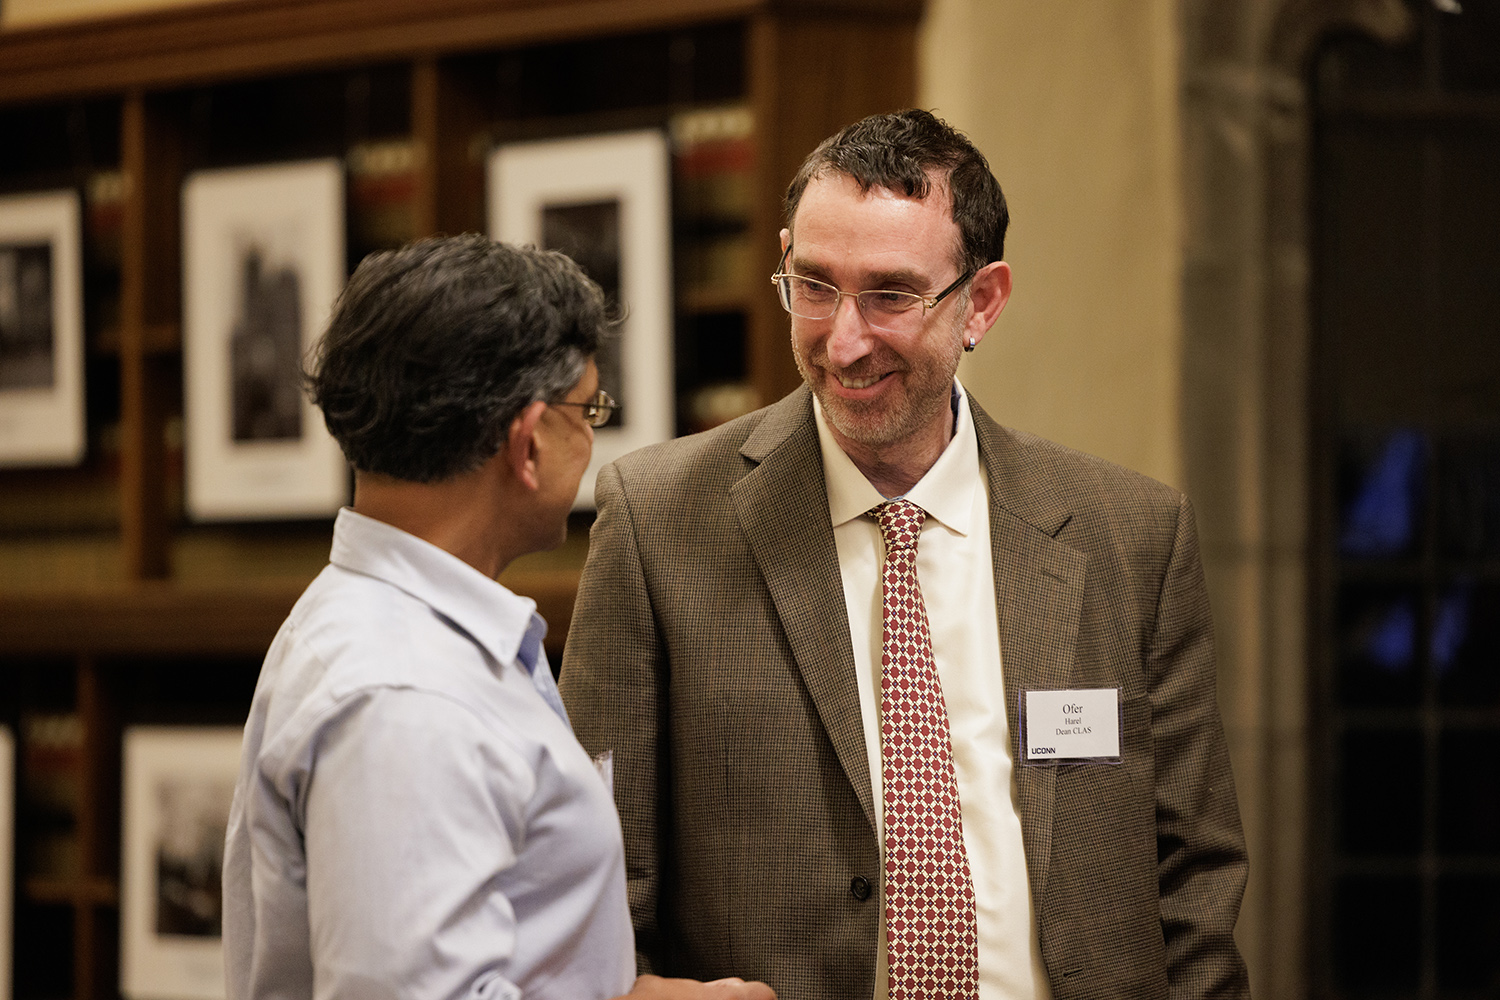 Interim Dean Ofer Harel speaks with an attendee of the first UConn Impact series event.